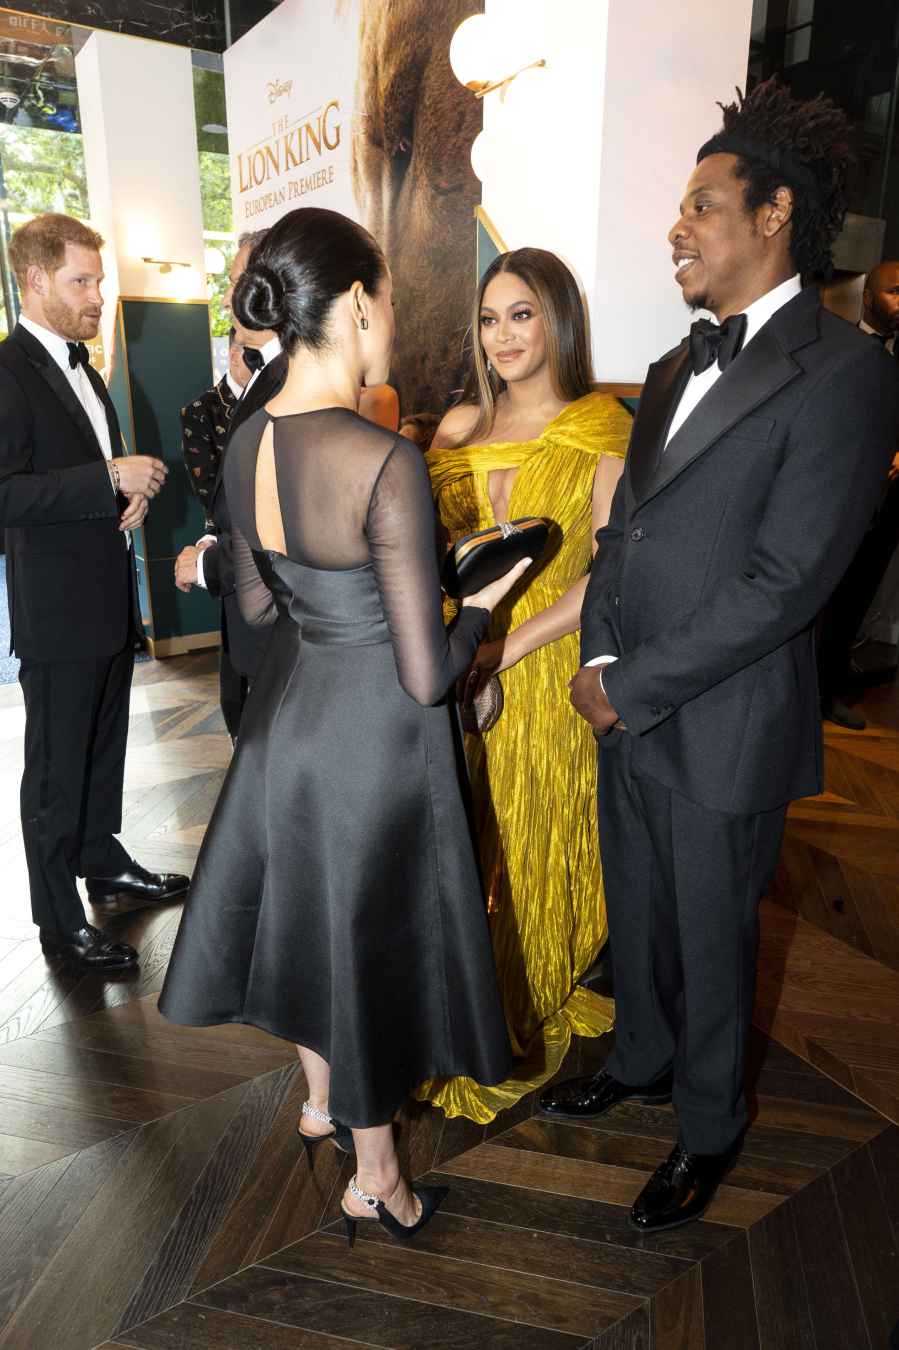 Beyonce and Duchess Meghan Sweetly Embrace Each Other at 'Lion King' Premiere